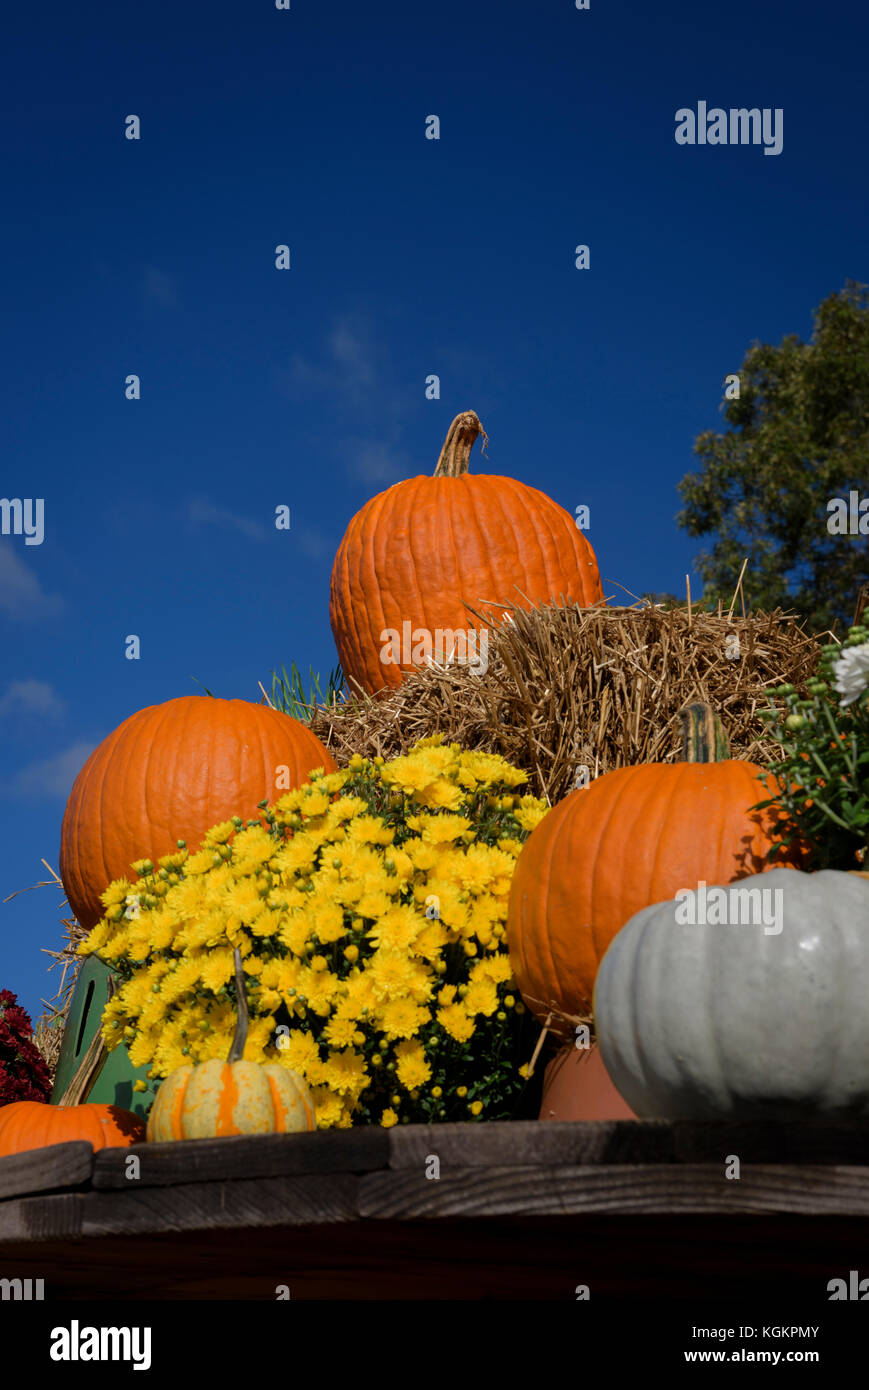 Pumpkins and chrysanthemum plants on display at a roadside produce stand. Stock Photo